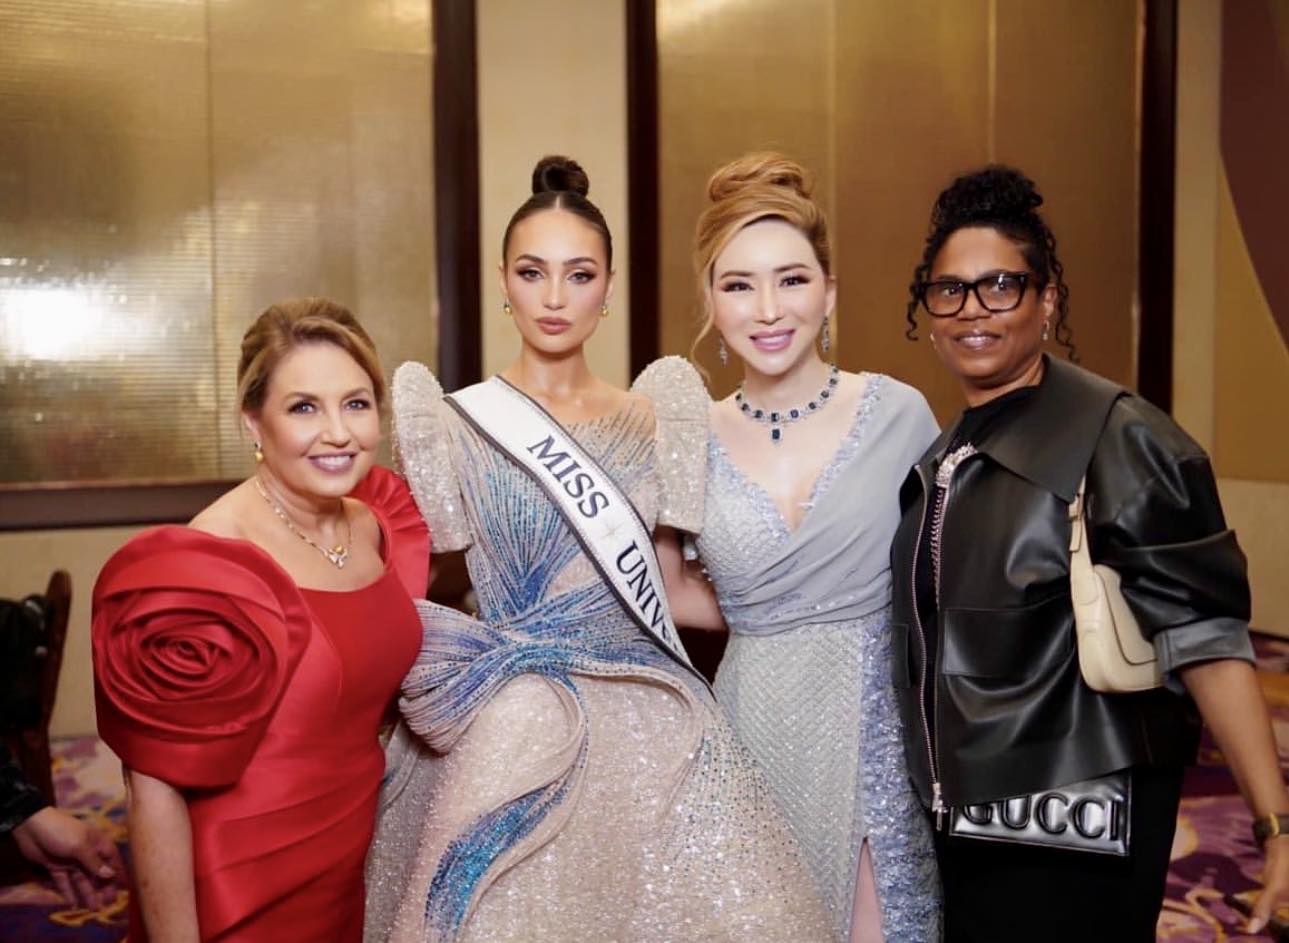 Miss Universe is “a beautiful journey that helps push us forward”